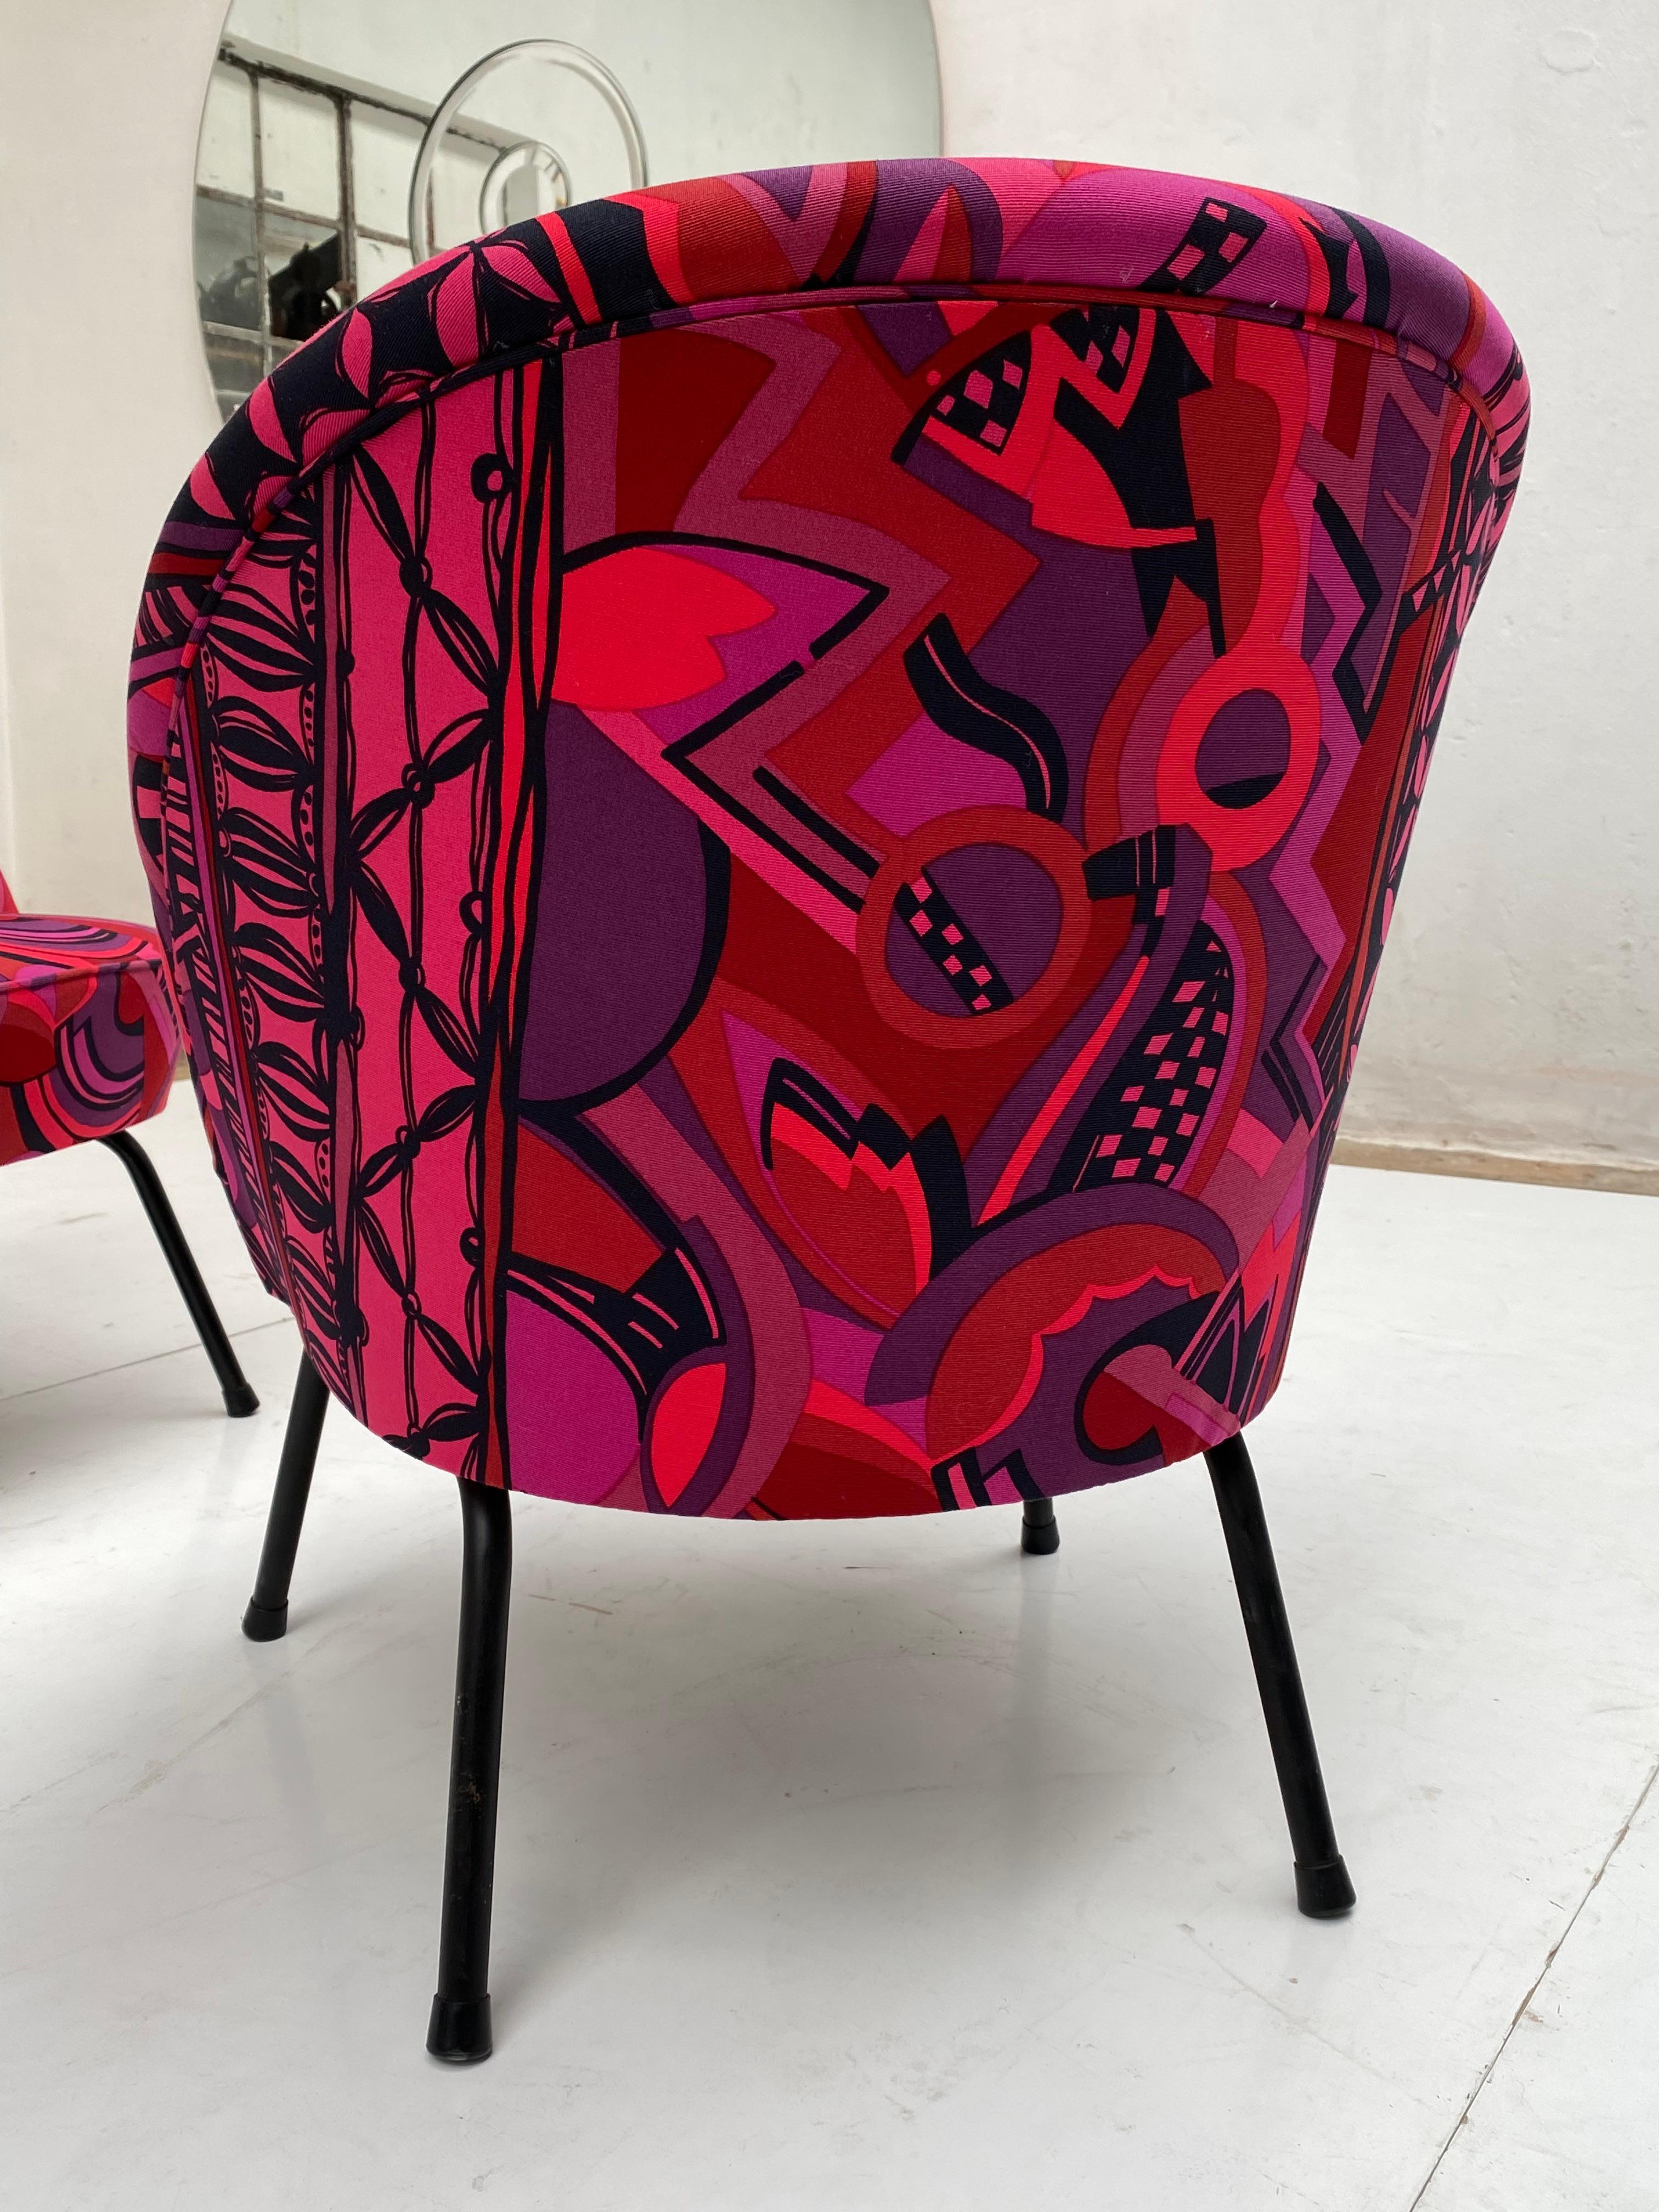 Bespoke Gianni Versace Fabric Custom Upholstered Pair of 1950's Cocktail Chairs For Sale 2